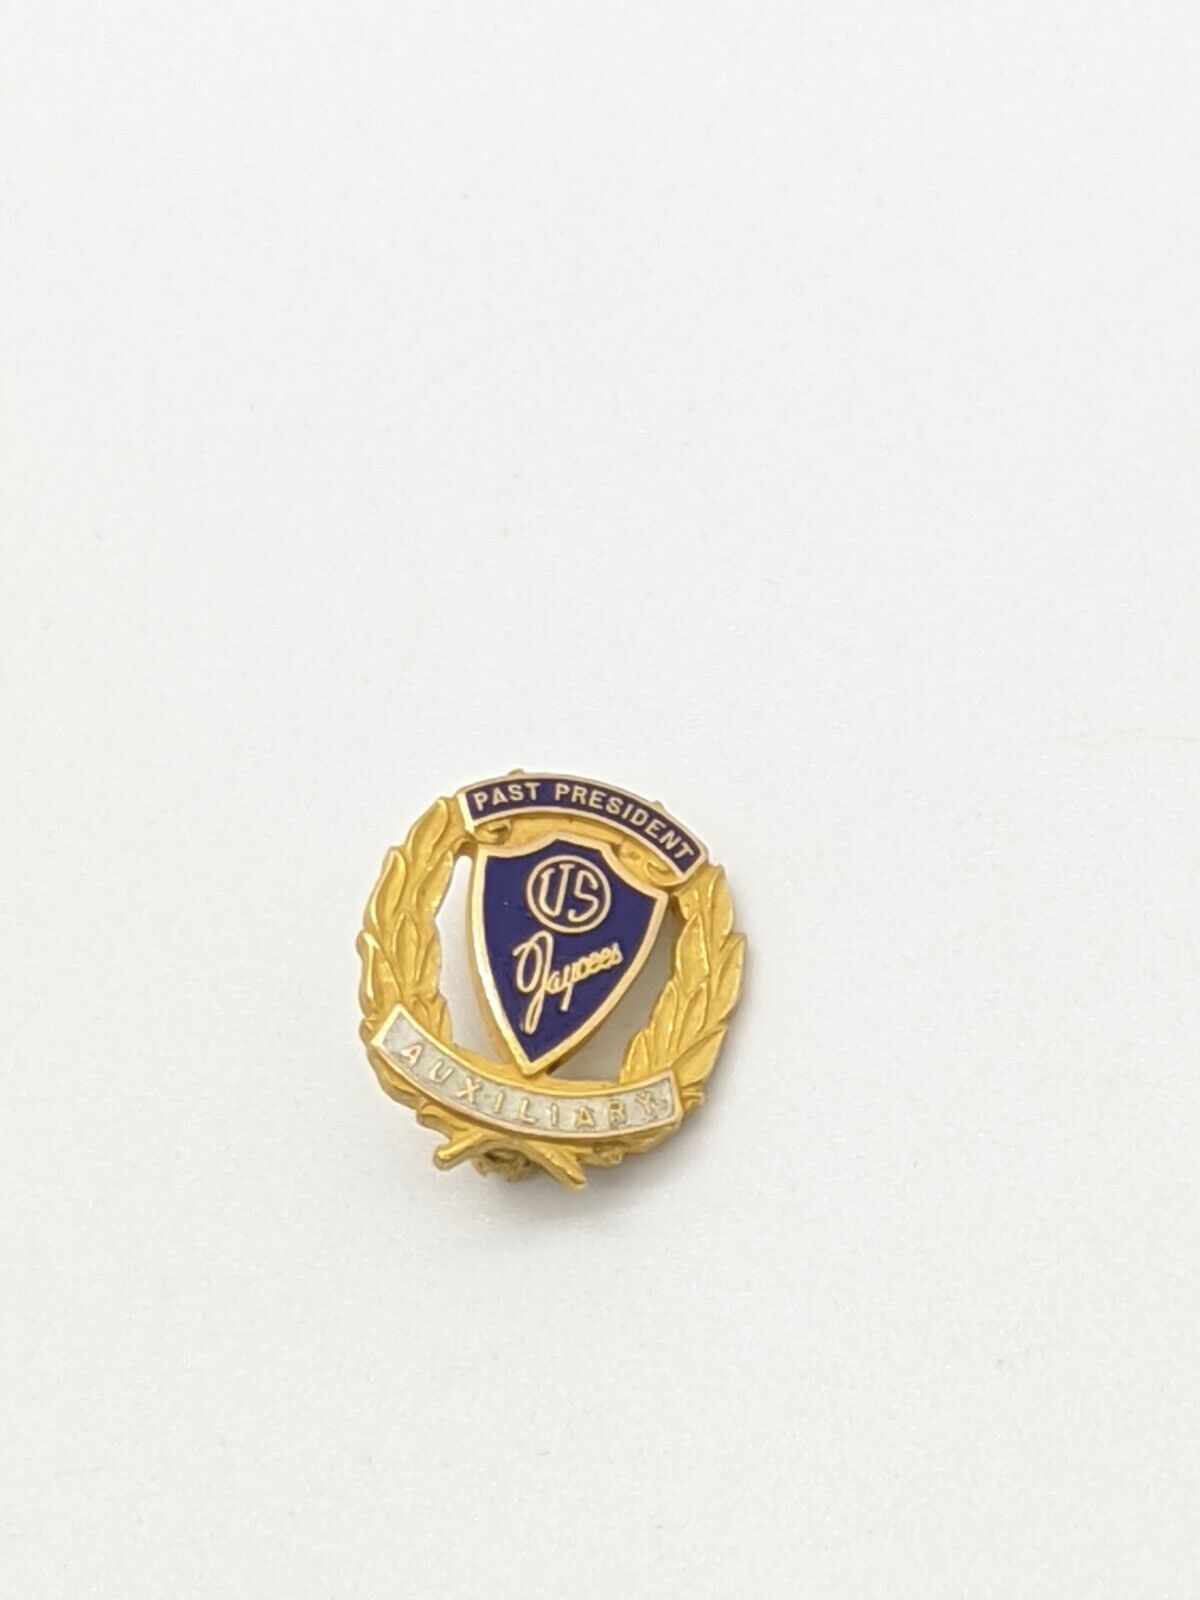 Vintage Gold Tone US Jaycees Auxillary Past President Pin